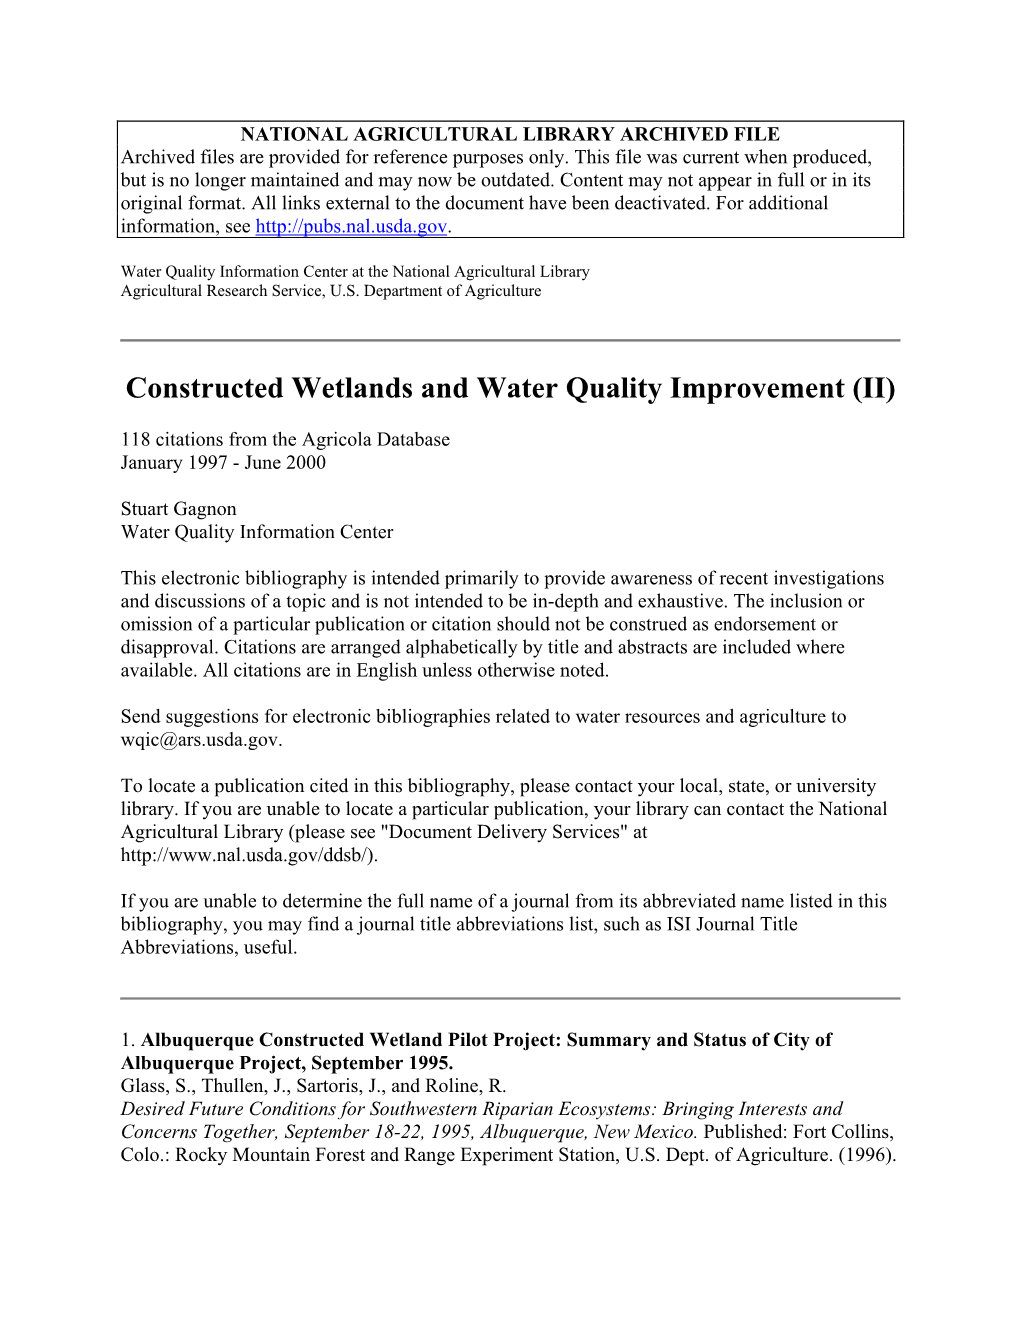 Constructed Wetlands and Water Quality Improvement (II)